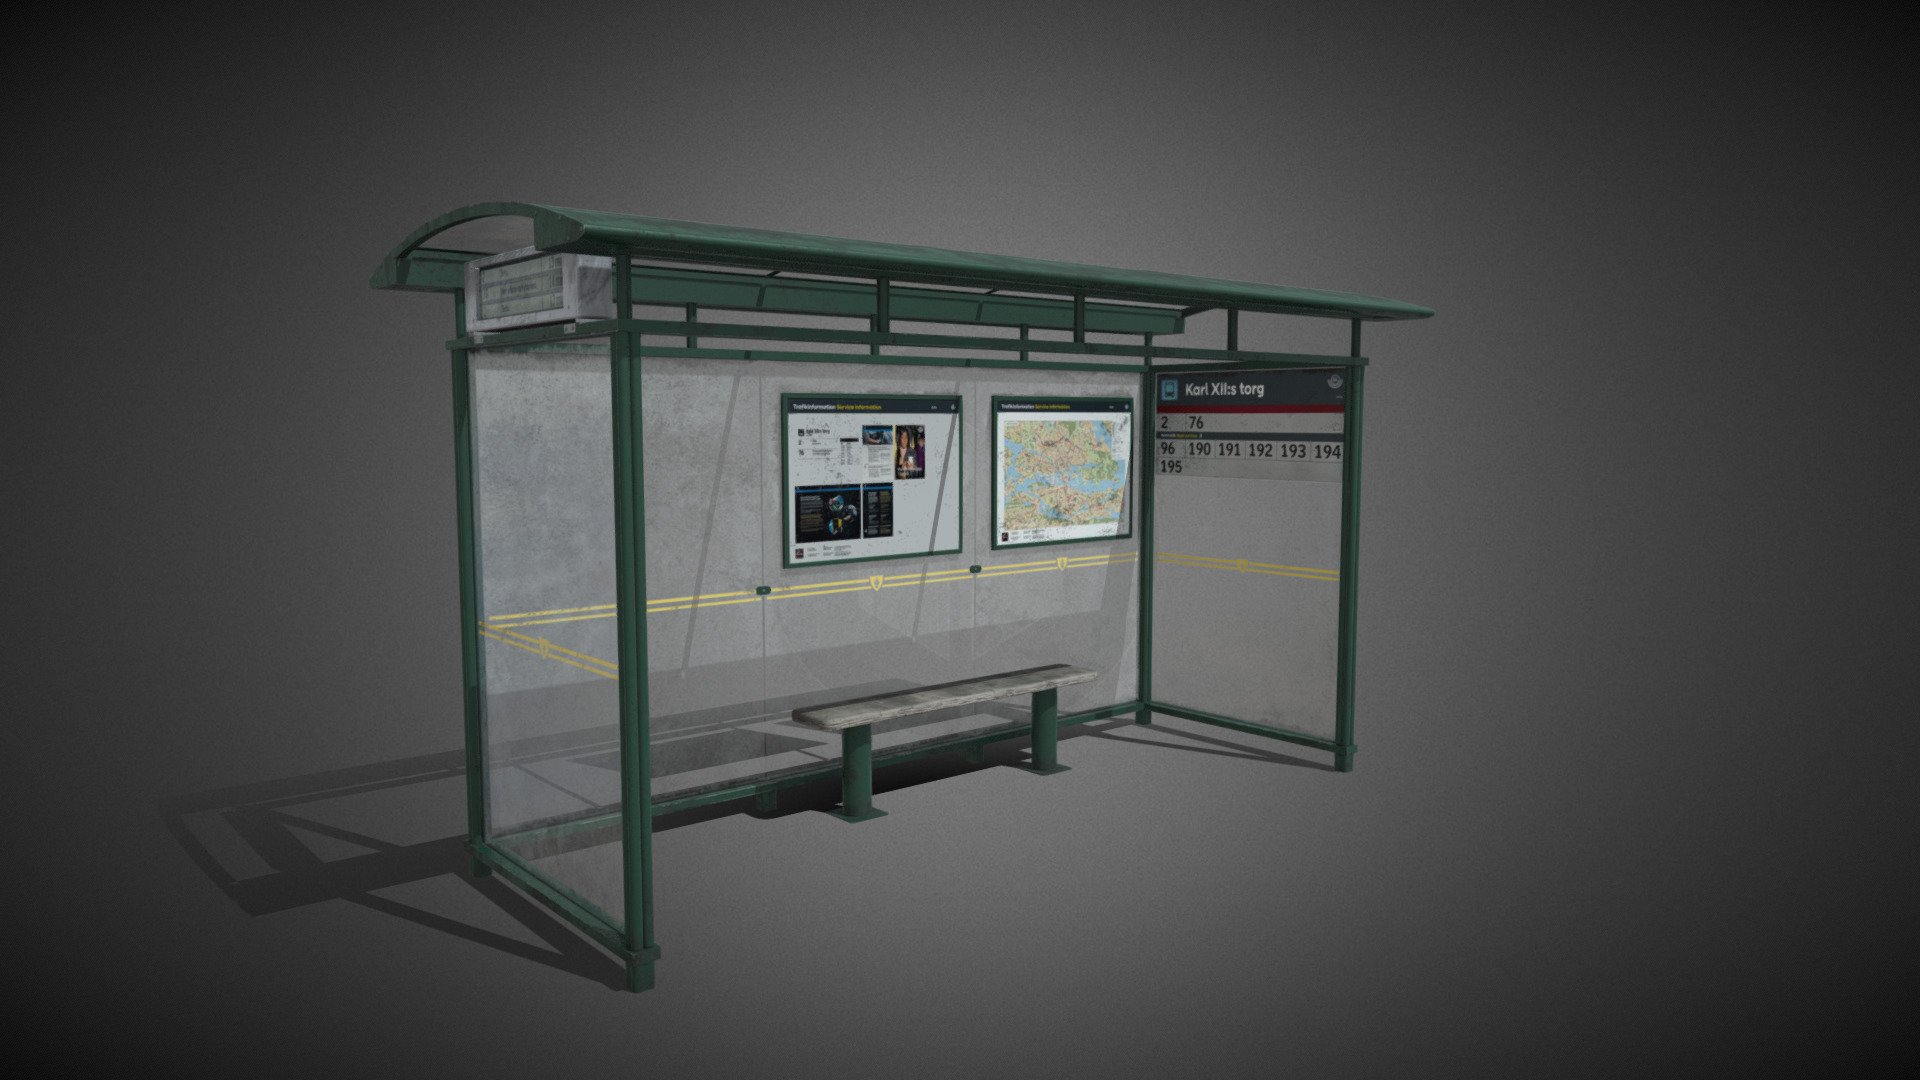 a busstop  often found in stockholm. this one stands at kungsträdgården.

modeled in 3dsmax,  painted in substance.

pbr, good for visualisation, games, vr and ar 3d model